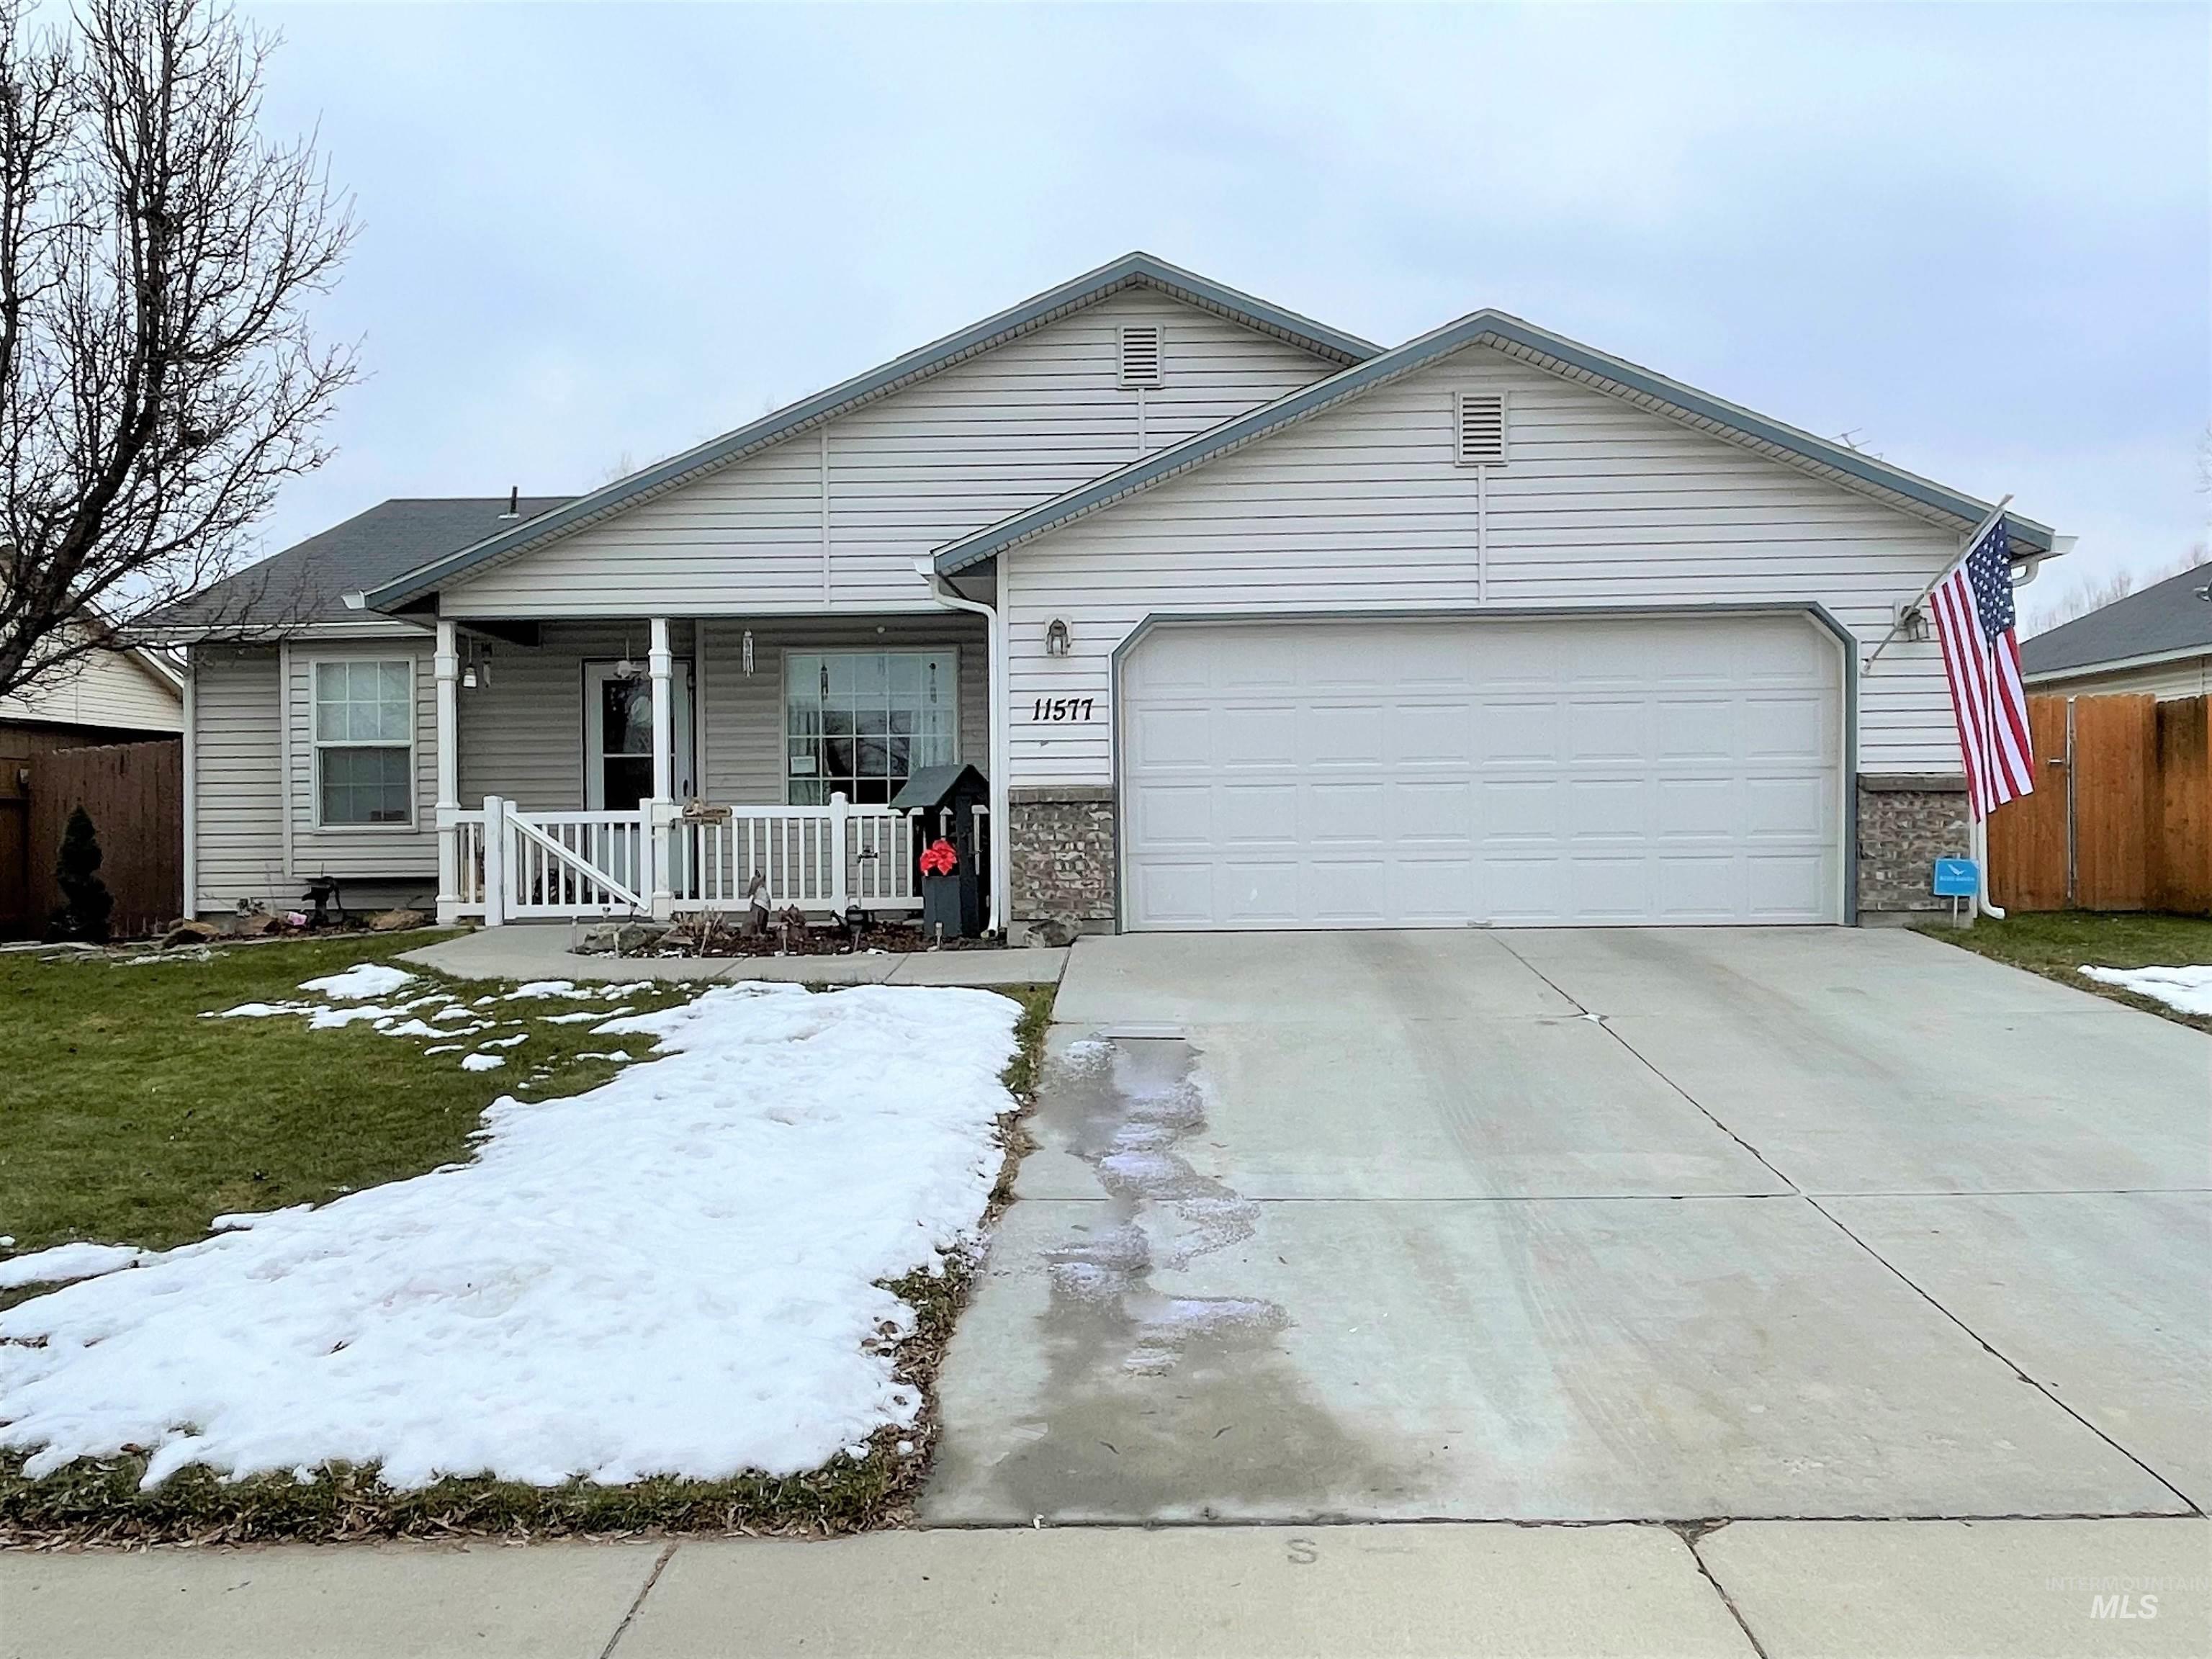 11577 W Crested Butte Ave., Nampa, ID 83651